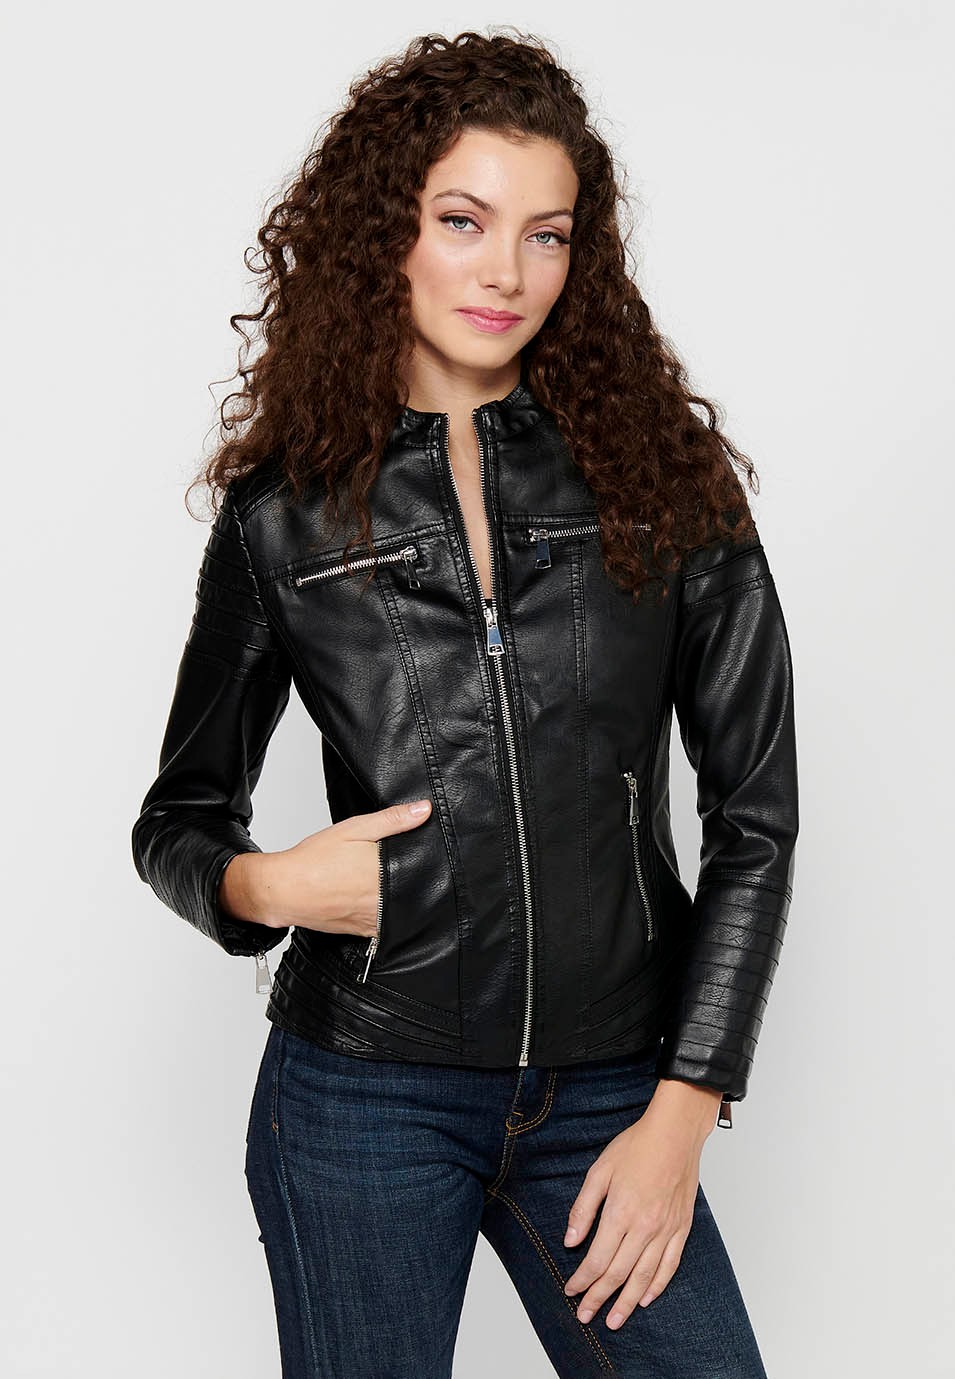 Long-sleeved jacket with zipper front closure and mandarin collar with details on the sleeves and shoulders in Black for Women